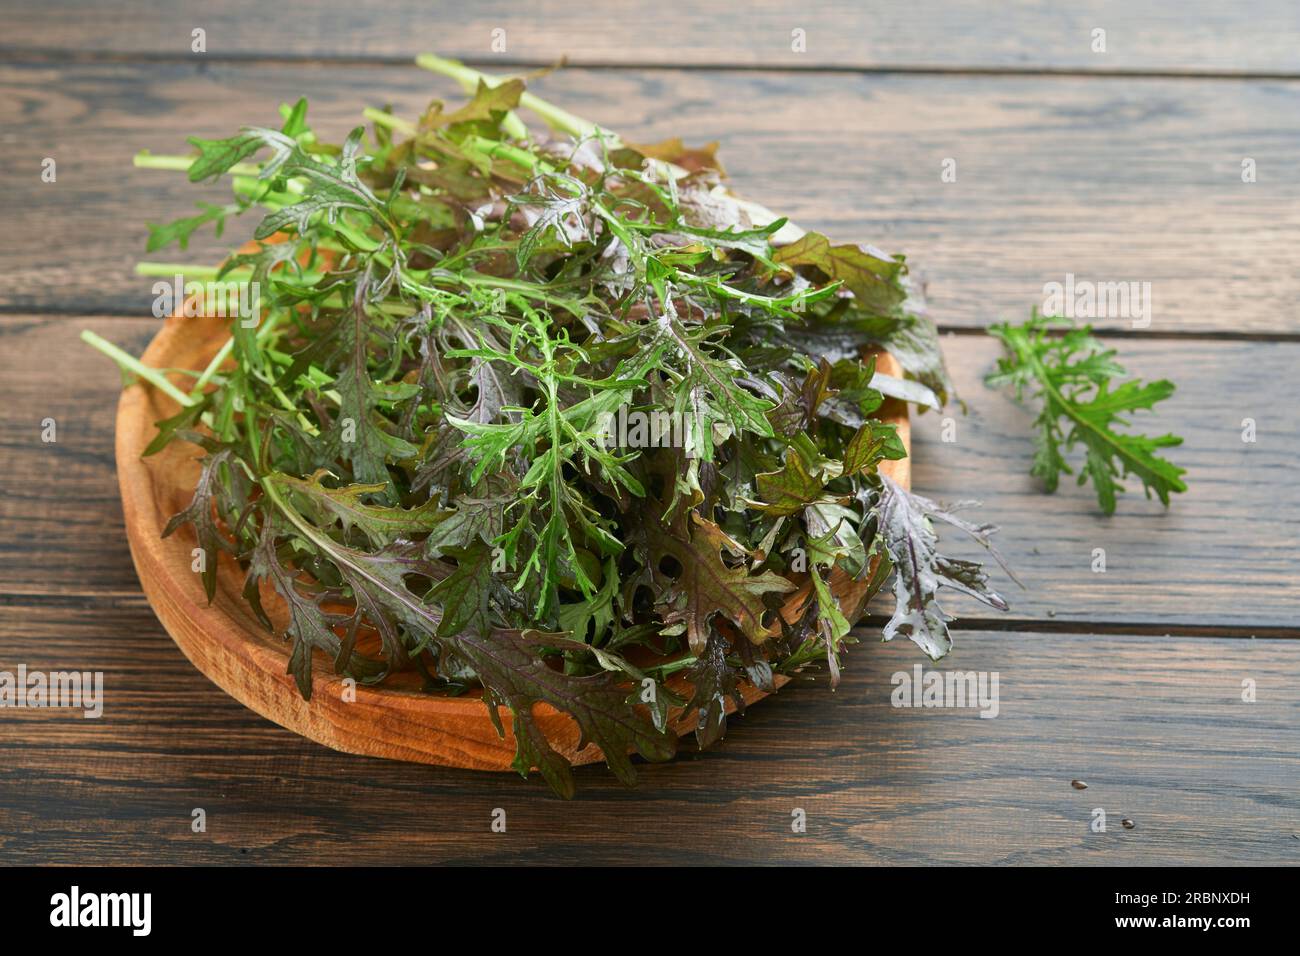 Arugula. Fresh leaves arugula salad on wooden bowl on old wooden table background. Arugula is source of vitamins and trace elements necessary for heal Stock Photo